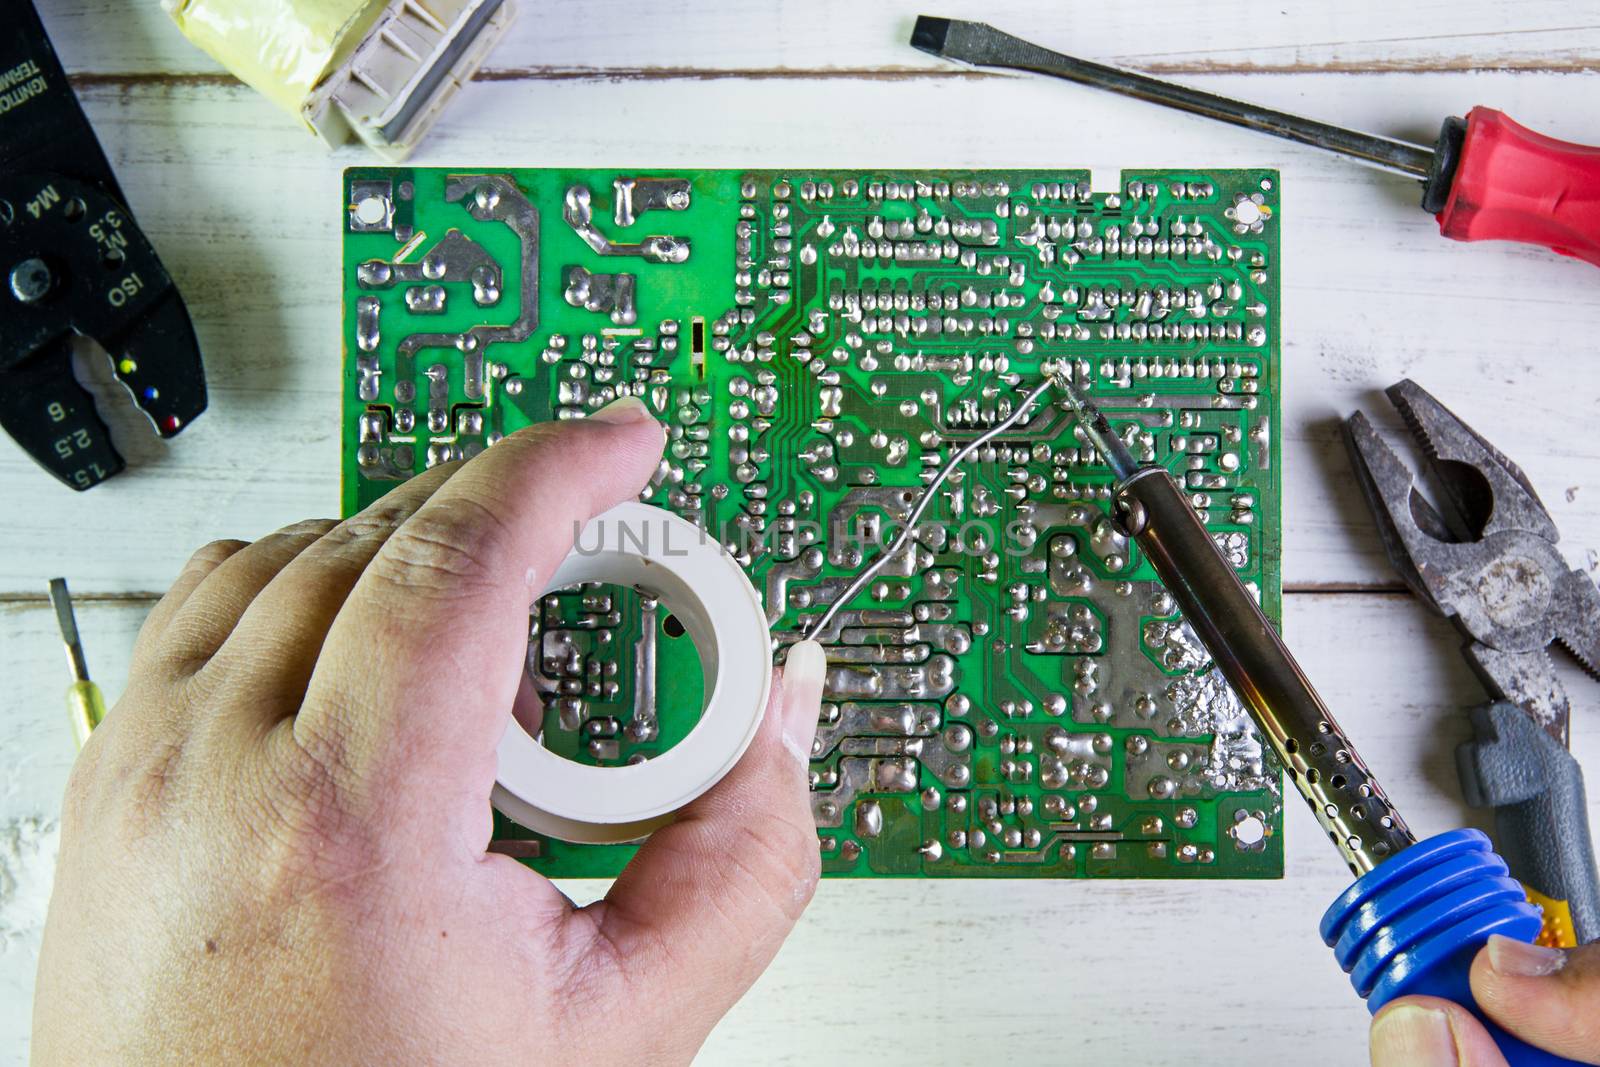 Serviceman soldering circuit board with soldering iron in the service workshop.